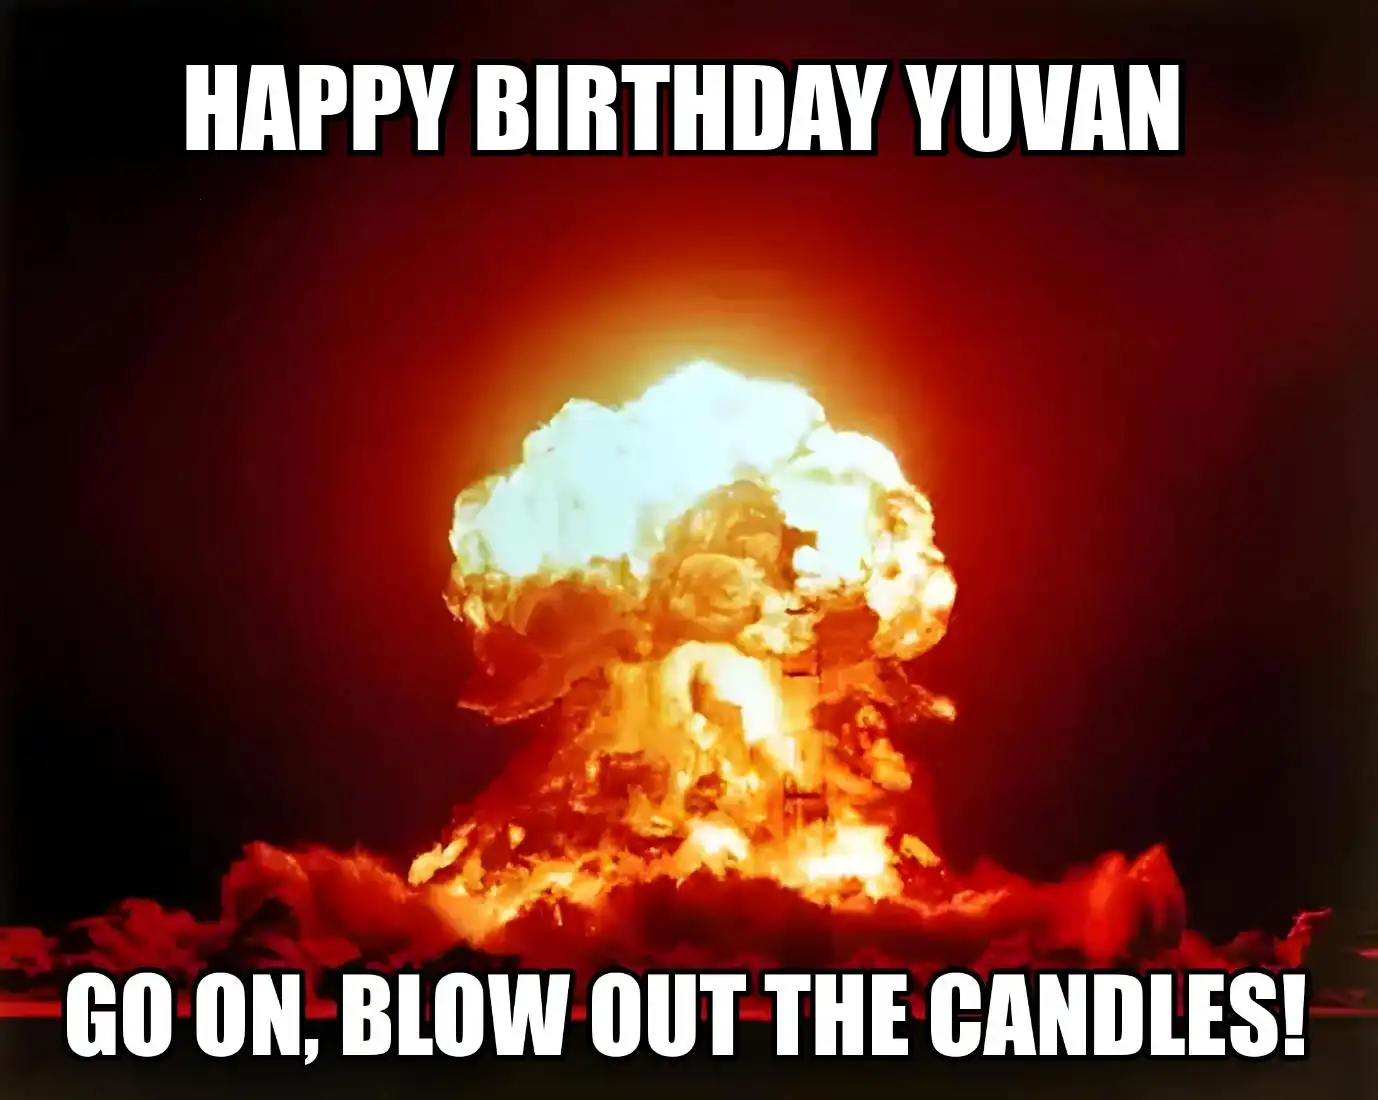 Happy Birthday Yuvan Go On Blow Out The Candles Meme